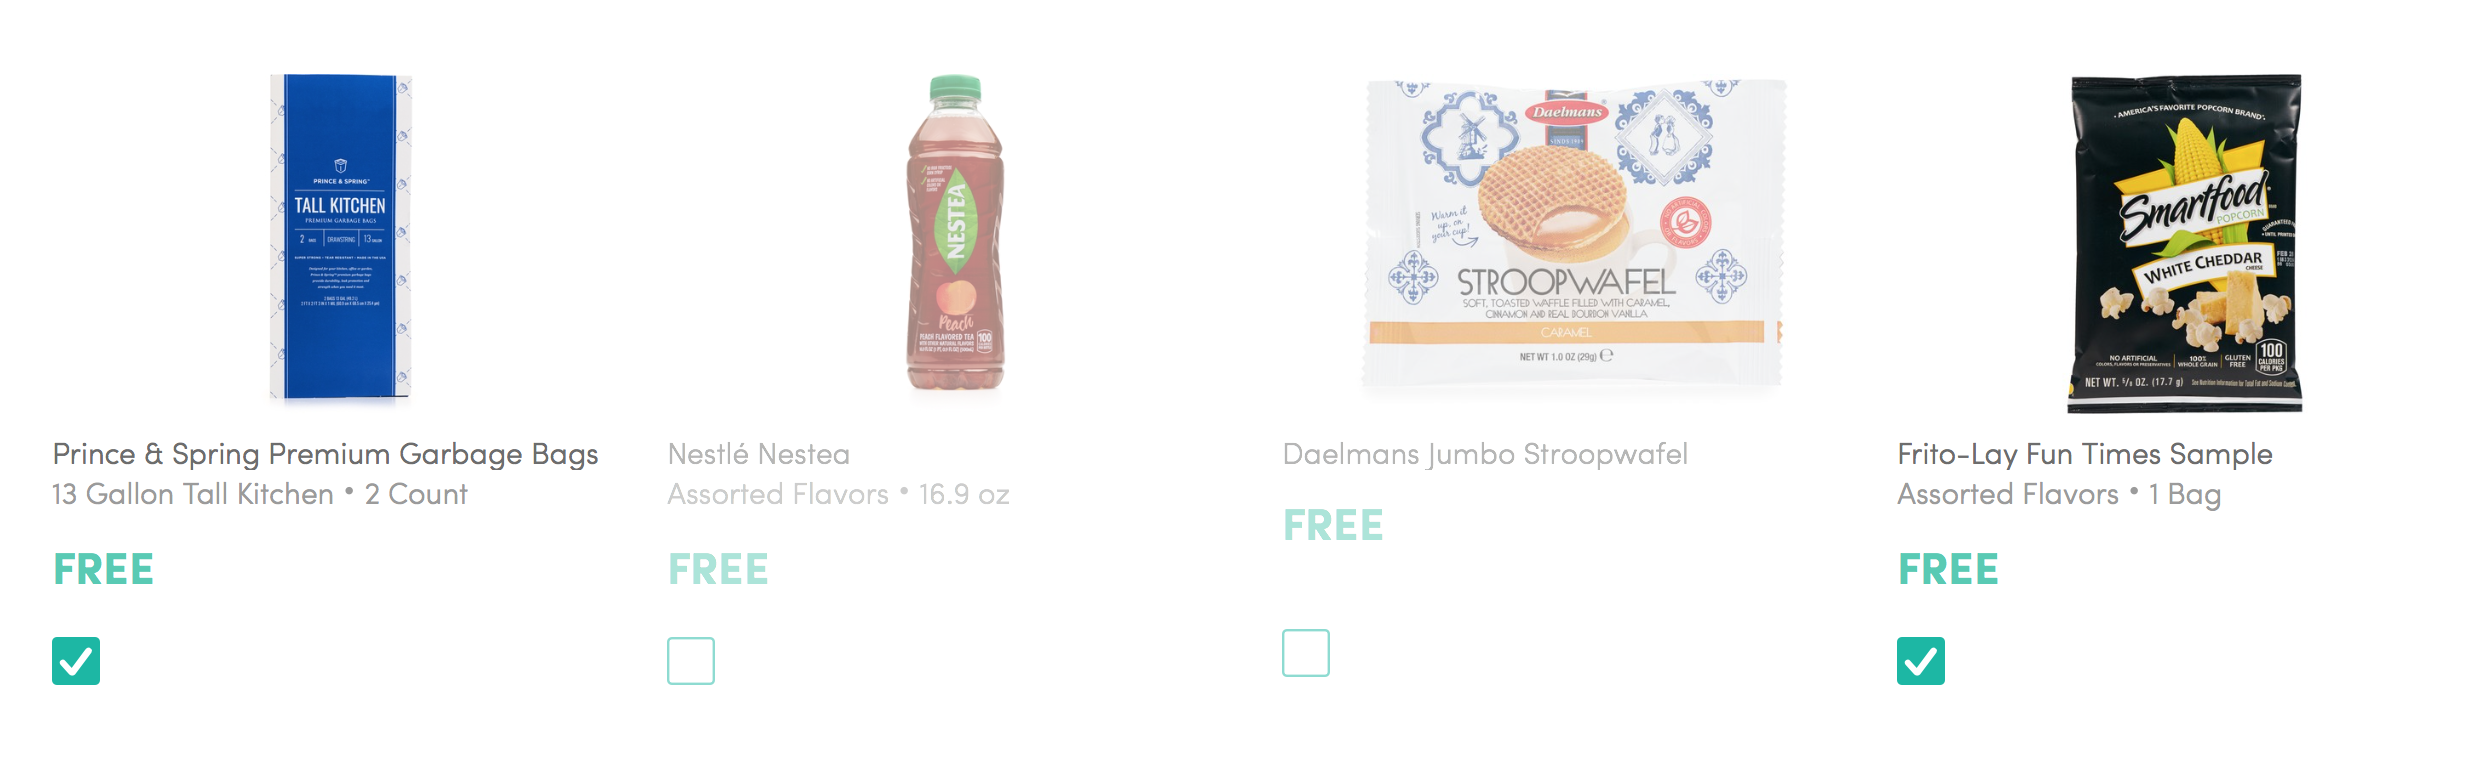 a bottle of juice and a package of stroopwafel